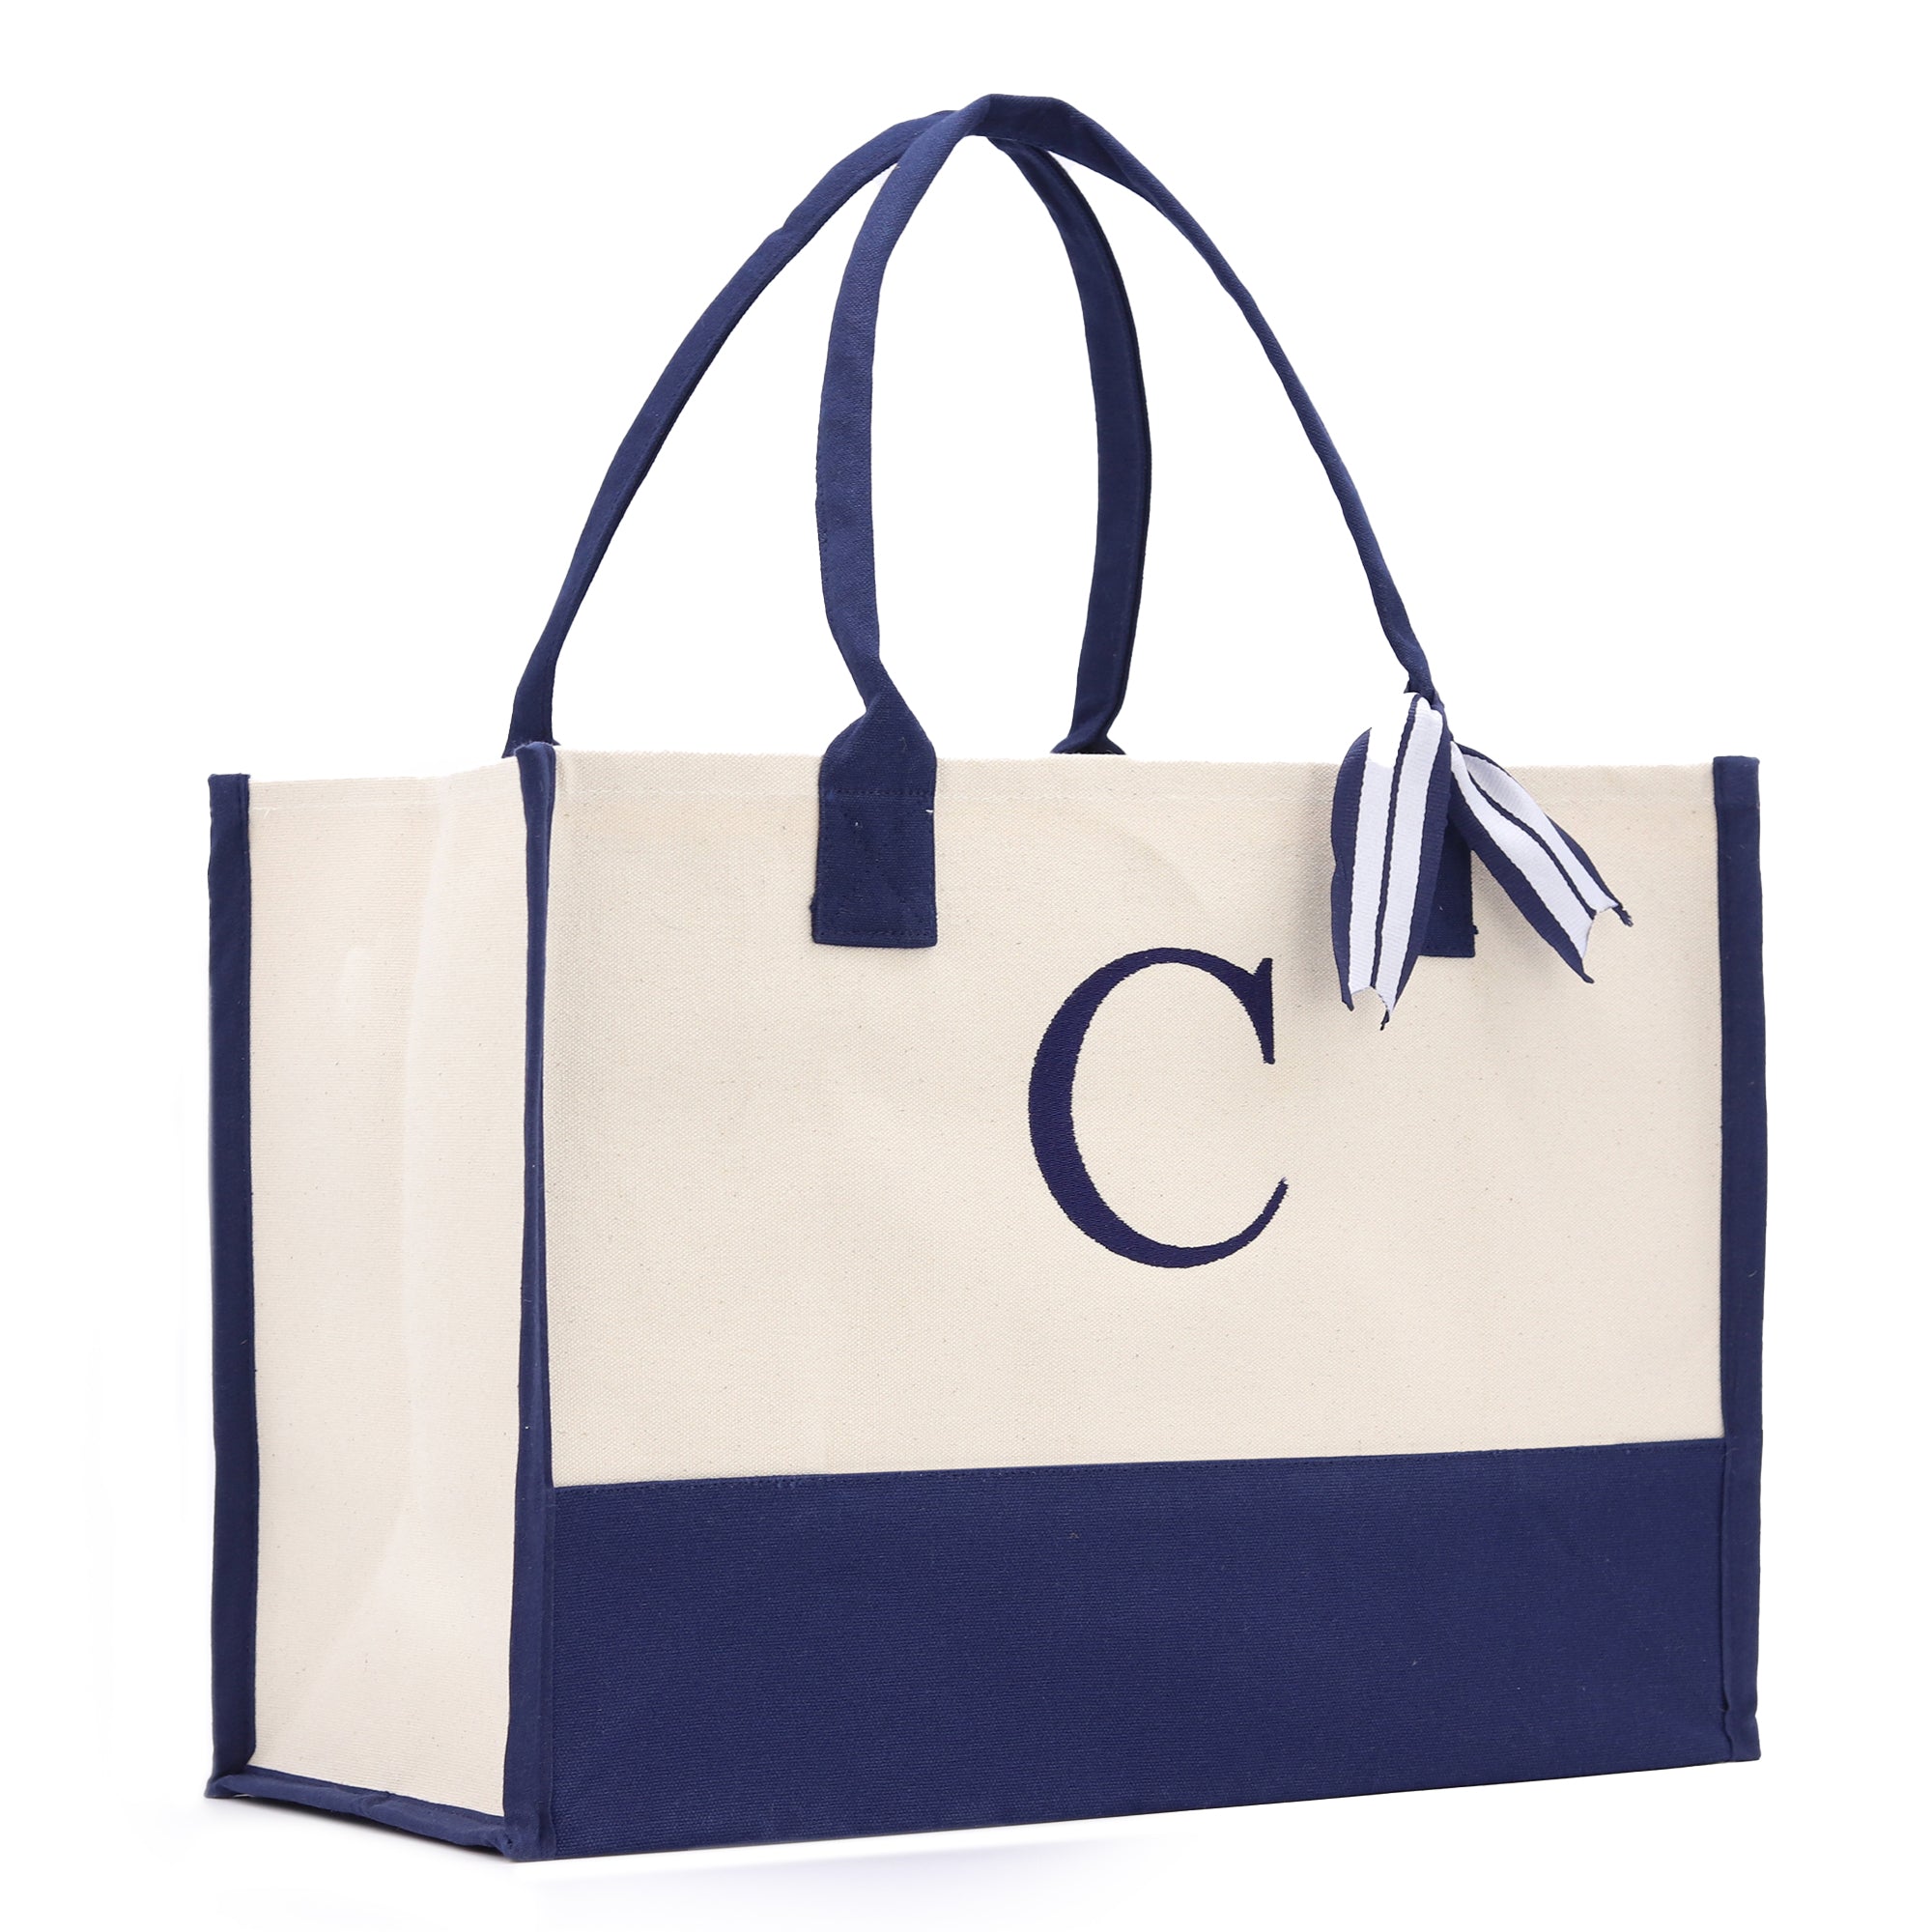 Monogram Tote Bag with 100% Cotton Canvas and a Chic Personalized Monogram Navy Blue Vanessa Rosella Block C 